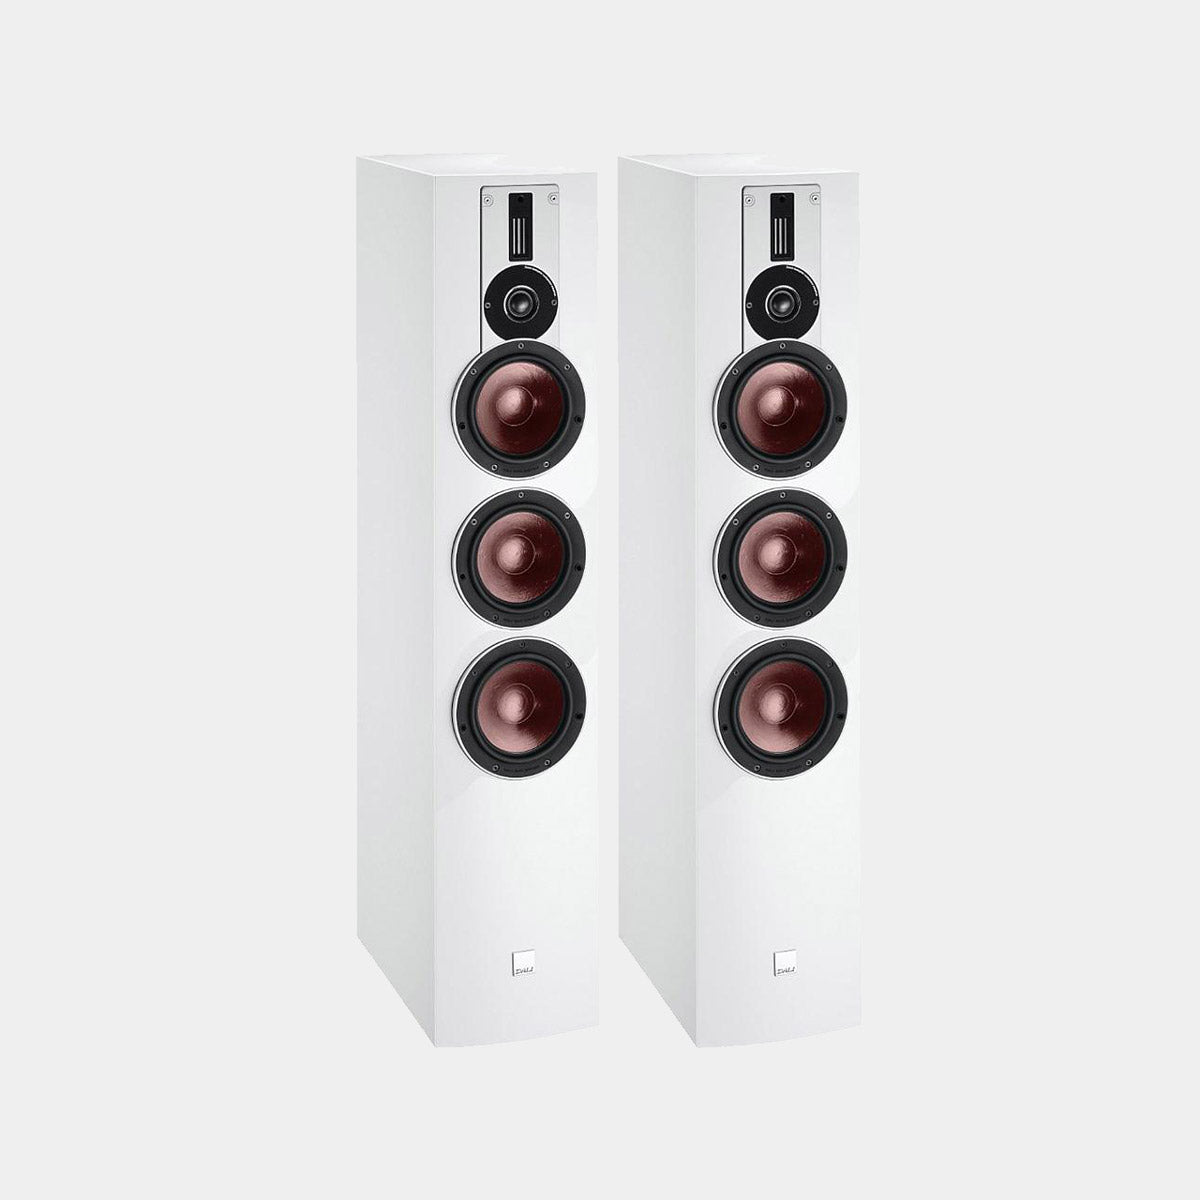 A pair of Dali rubicon 8 speakers in white